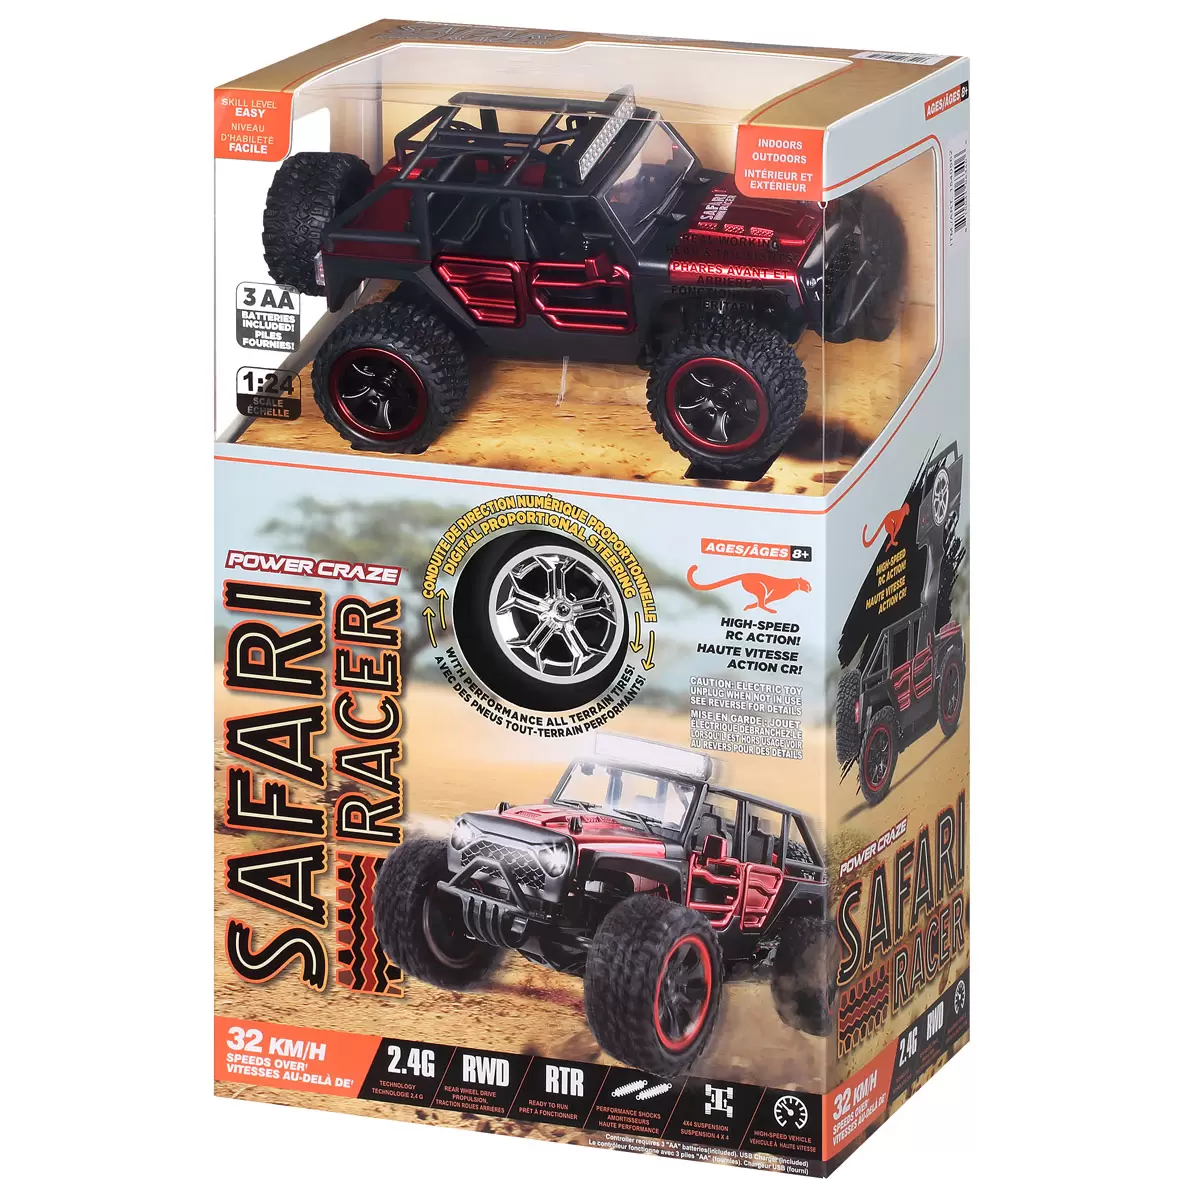 Buy Power Craze High Speed RC in Blue Front Image at Costco.co.uk